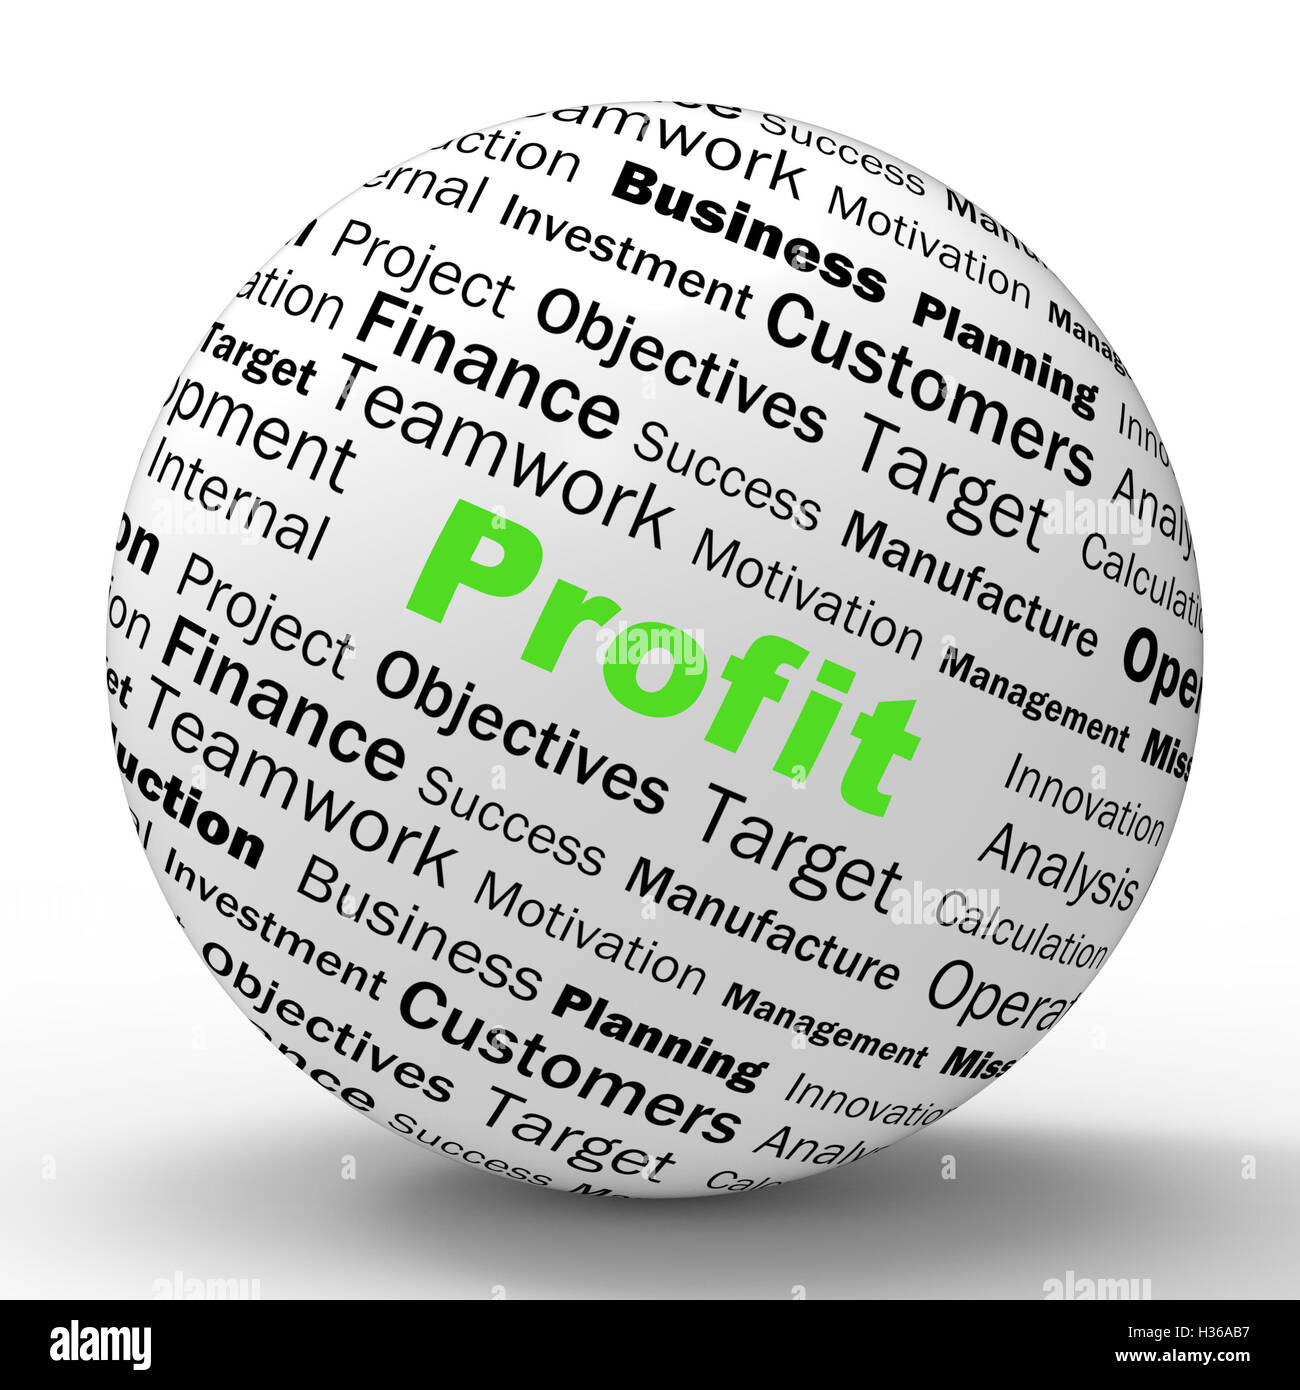 Profit Sphere Definition Means Company Growth Or Performance Stock Photo